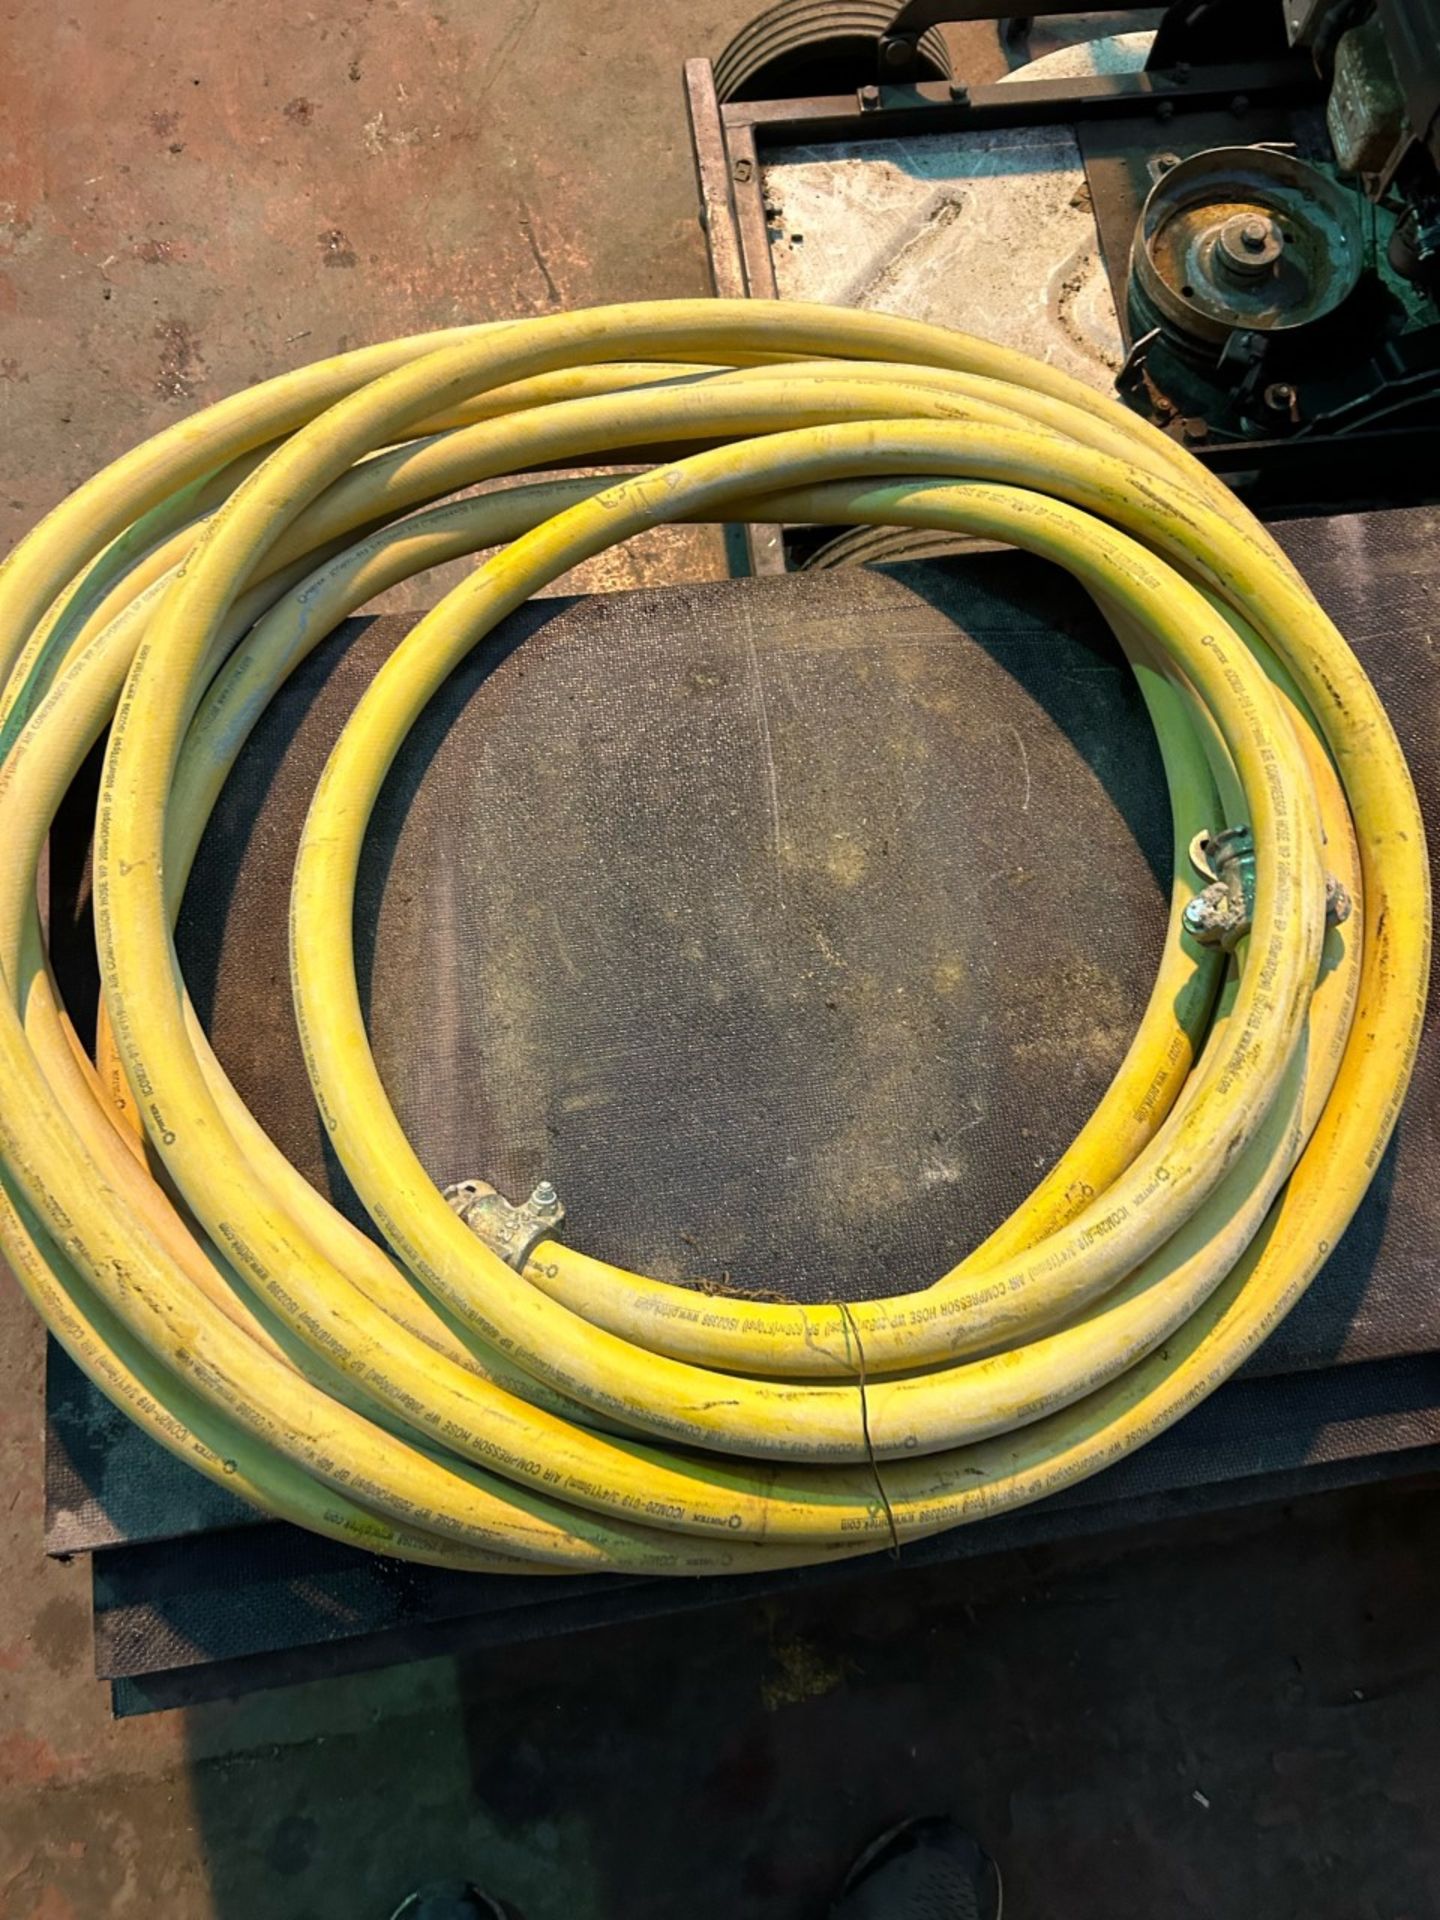 15m of Pirtek 3/4” air compressor hose with couplings fitted